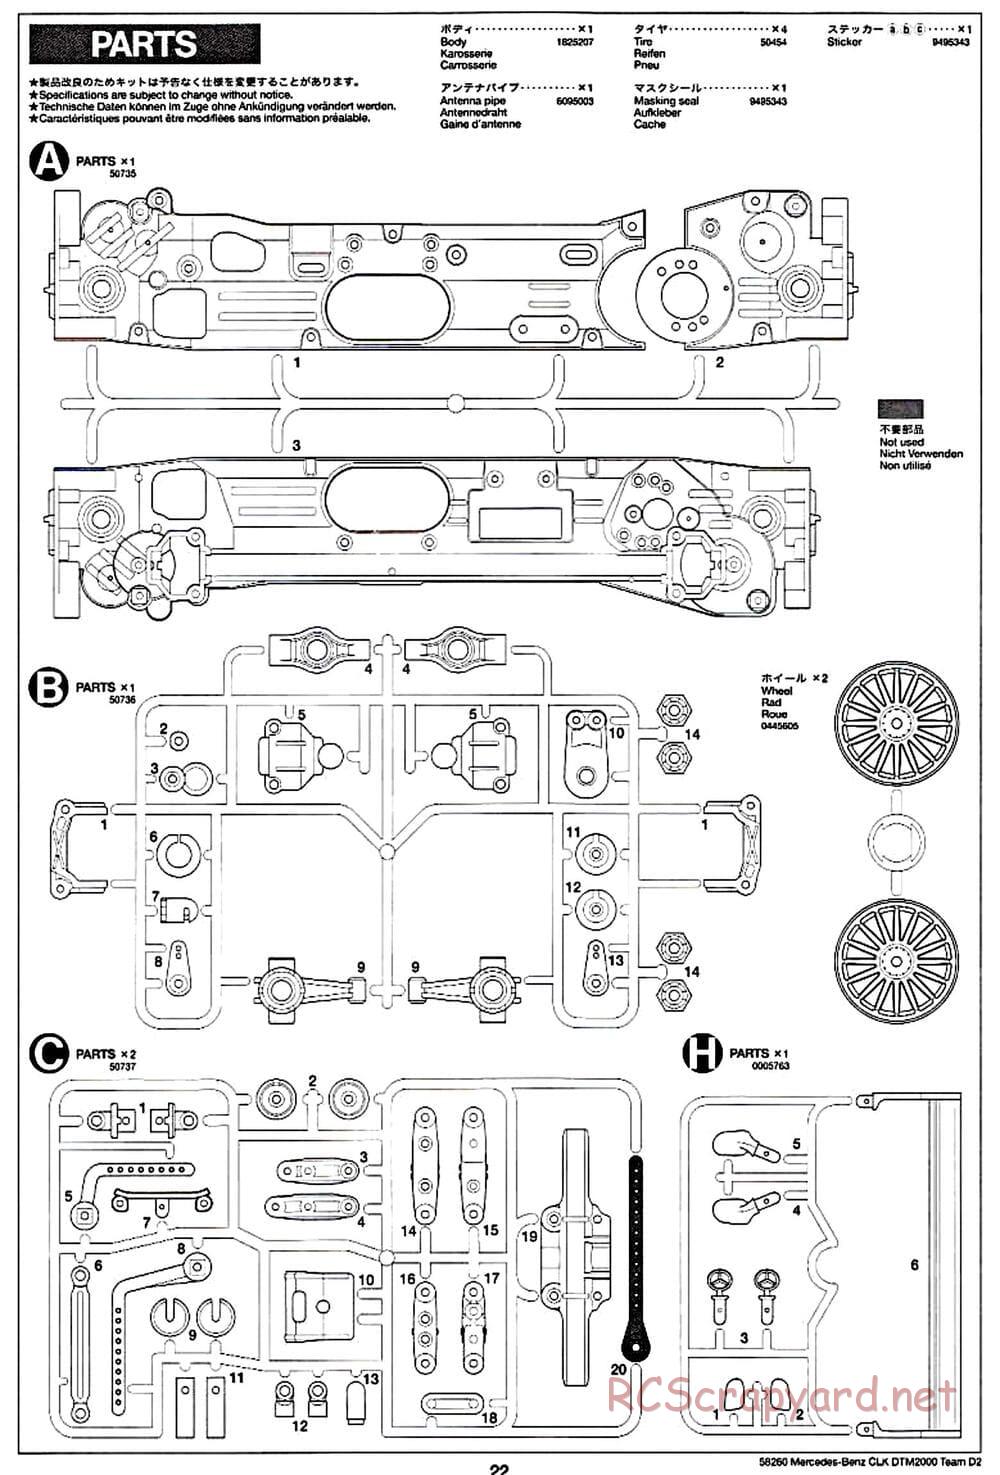 Tamiya - Mercedes Benz CLK DTM 2000 Team D2 - TL-01 Chassis - Manual - Page 22